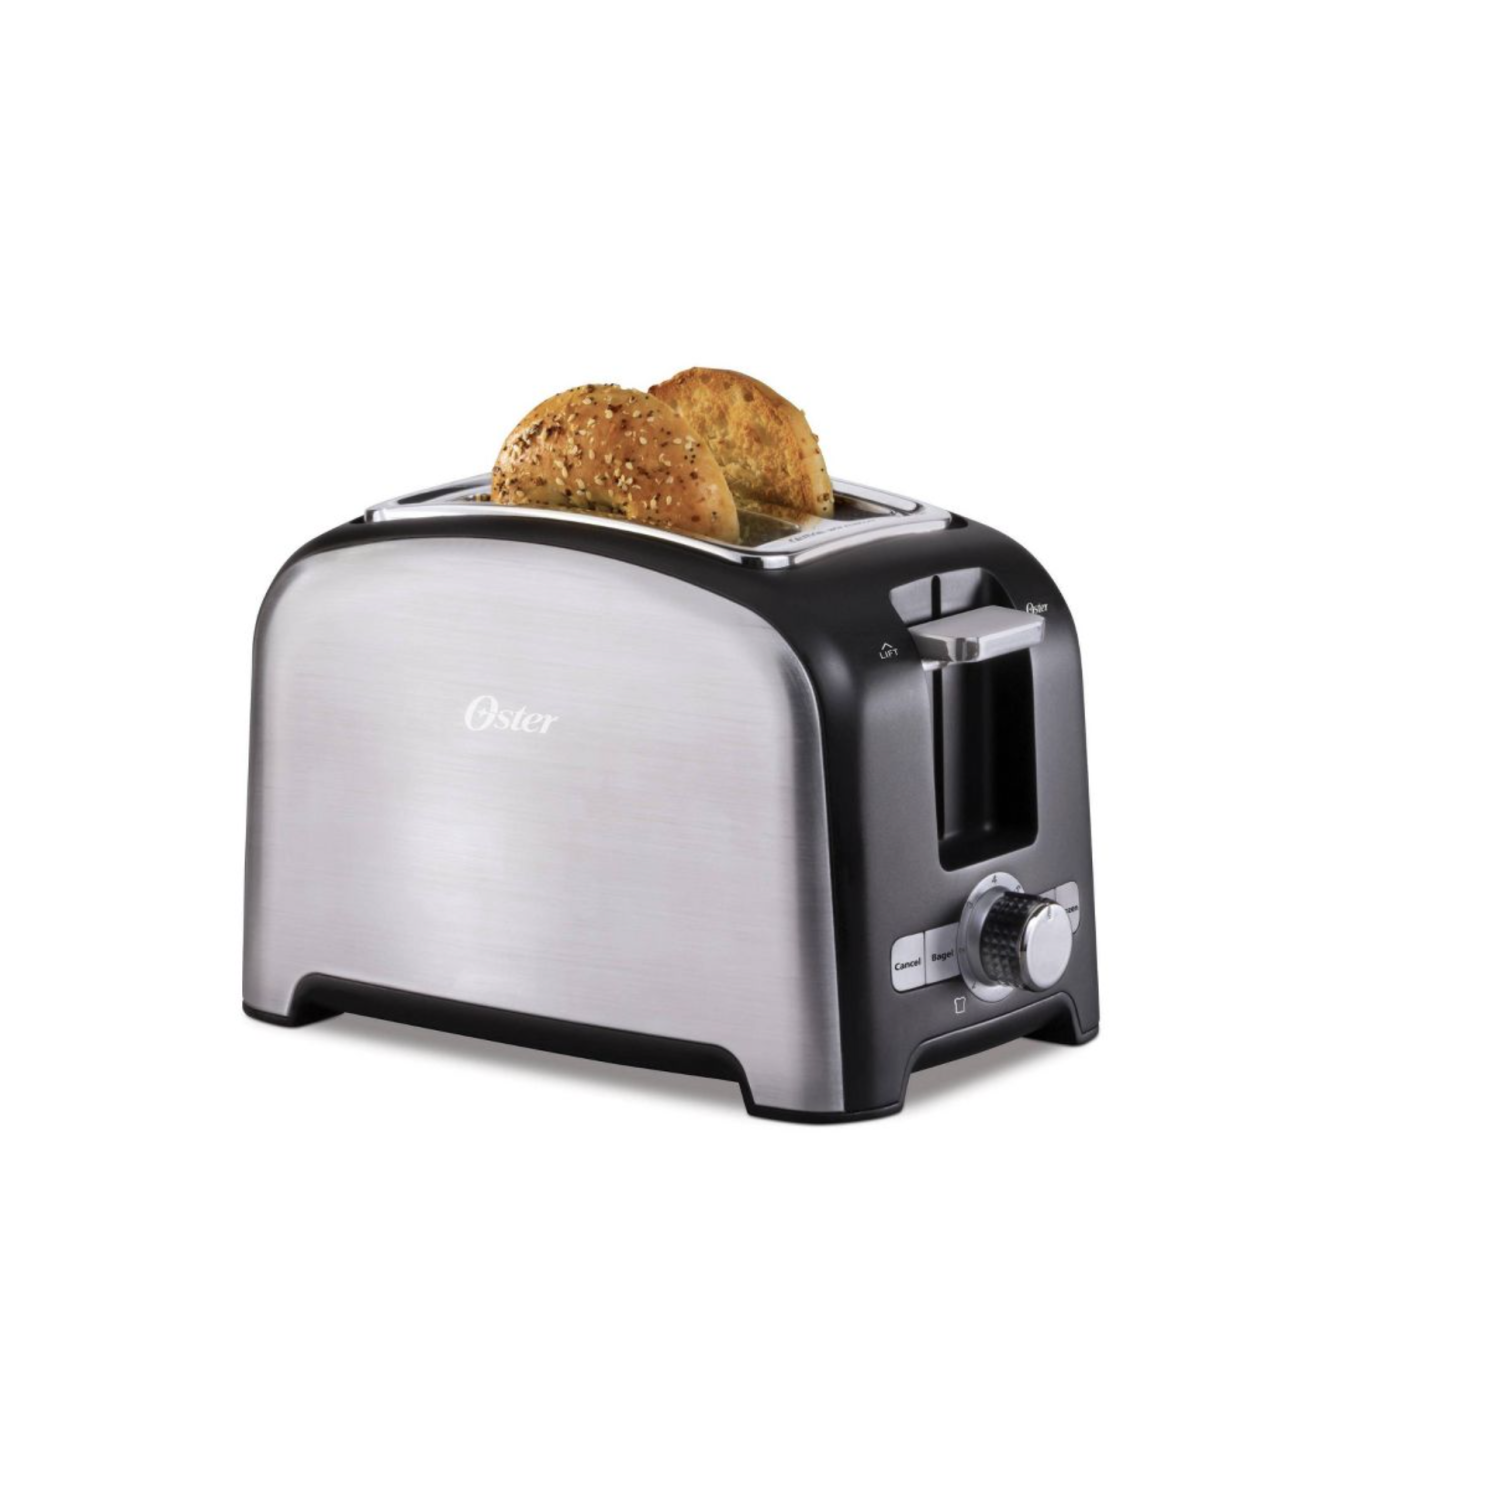 Oster 2 Slice Wide Slot Toaster, Stainless Steel - 2153501